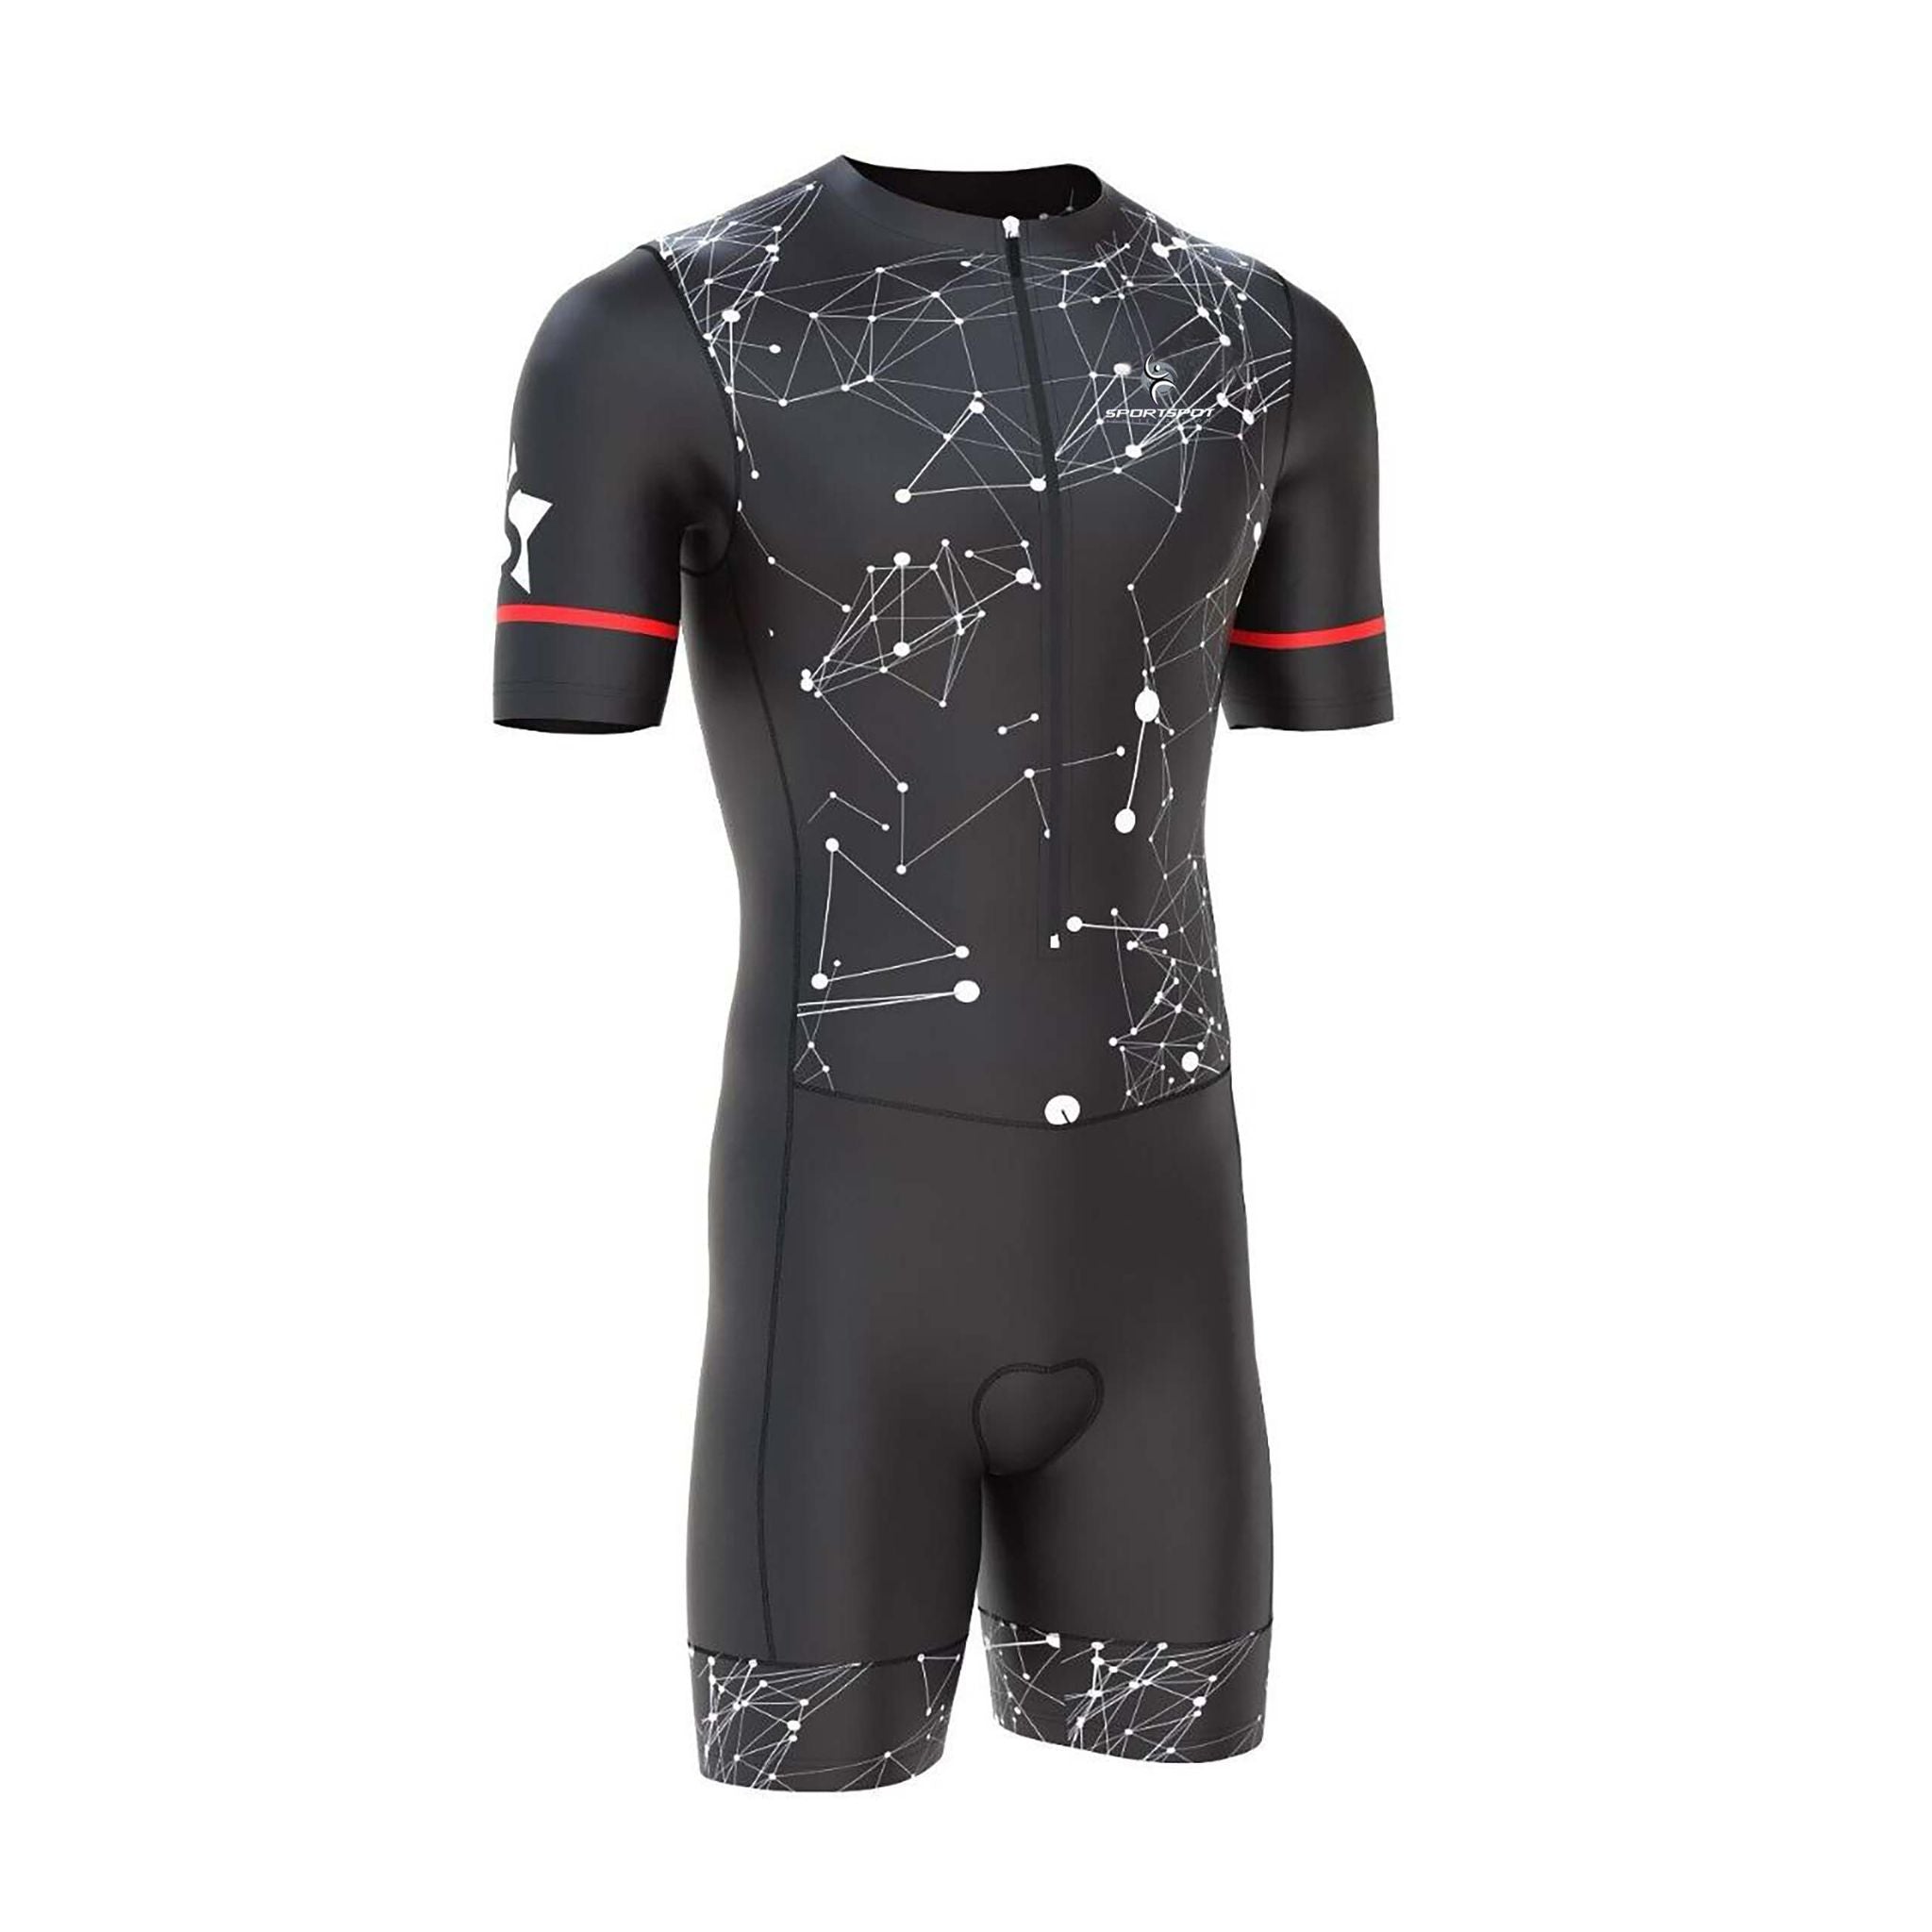 Men's Triathlon Compression Skinsuit for Cycling, Running, and Swimming with Gel Padding